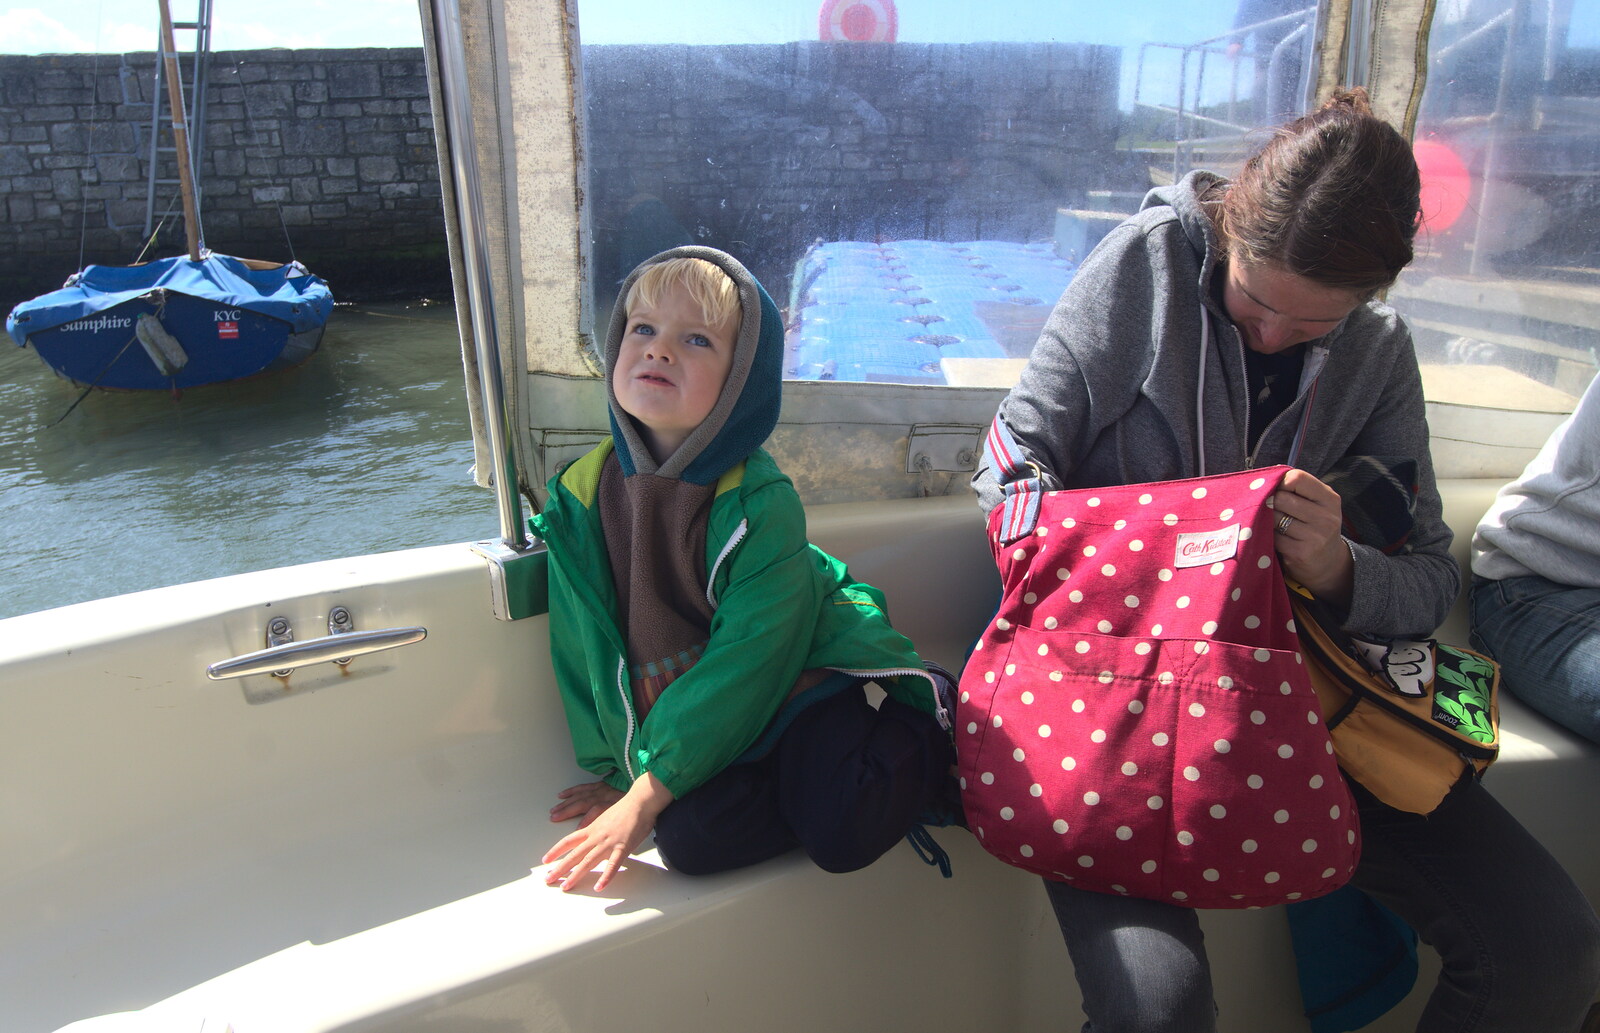 Harry and Isobel on the ferry from A Trip to Hurst Castle, Keyhaven, Hampshire - 28th August 2015